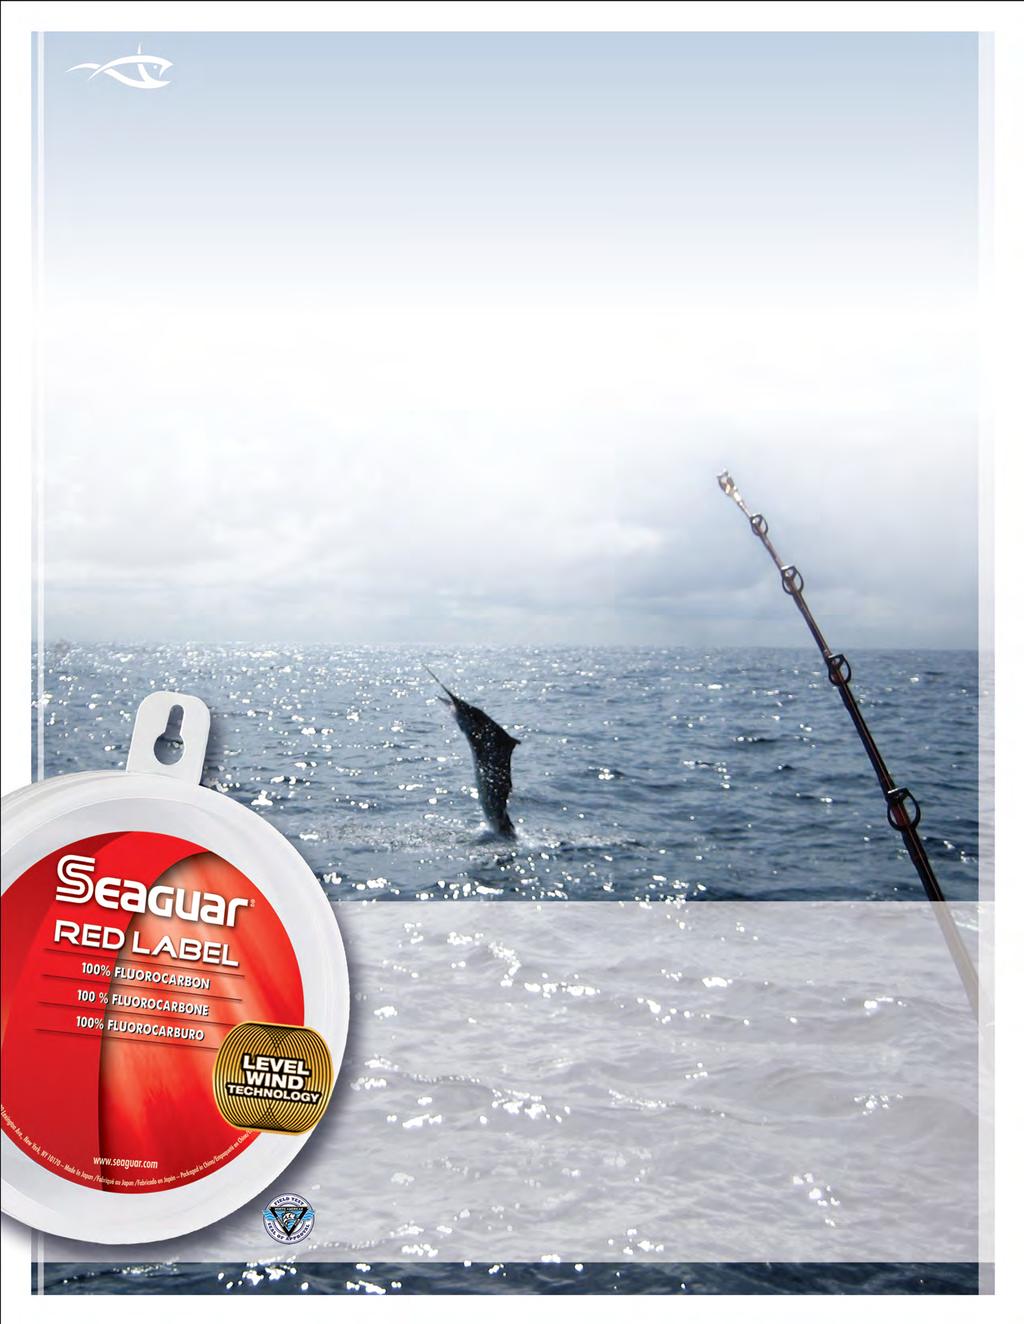 EMail COMMent #26 Seaguar makes our fishing more productive. We absolutely love your product. - Captain Ben Jamie Conway Portland, ME Grand Max 34% better knot strength 1 Hidden. Strength.